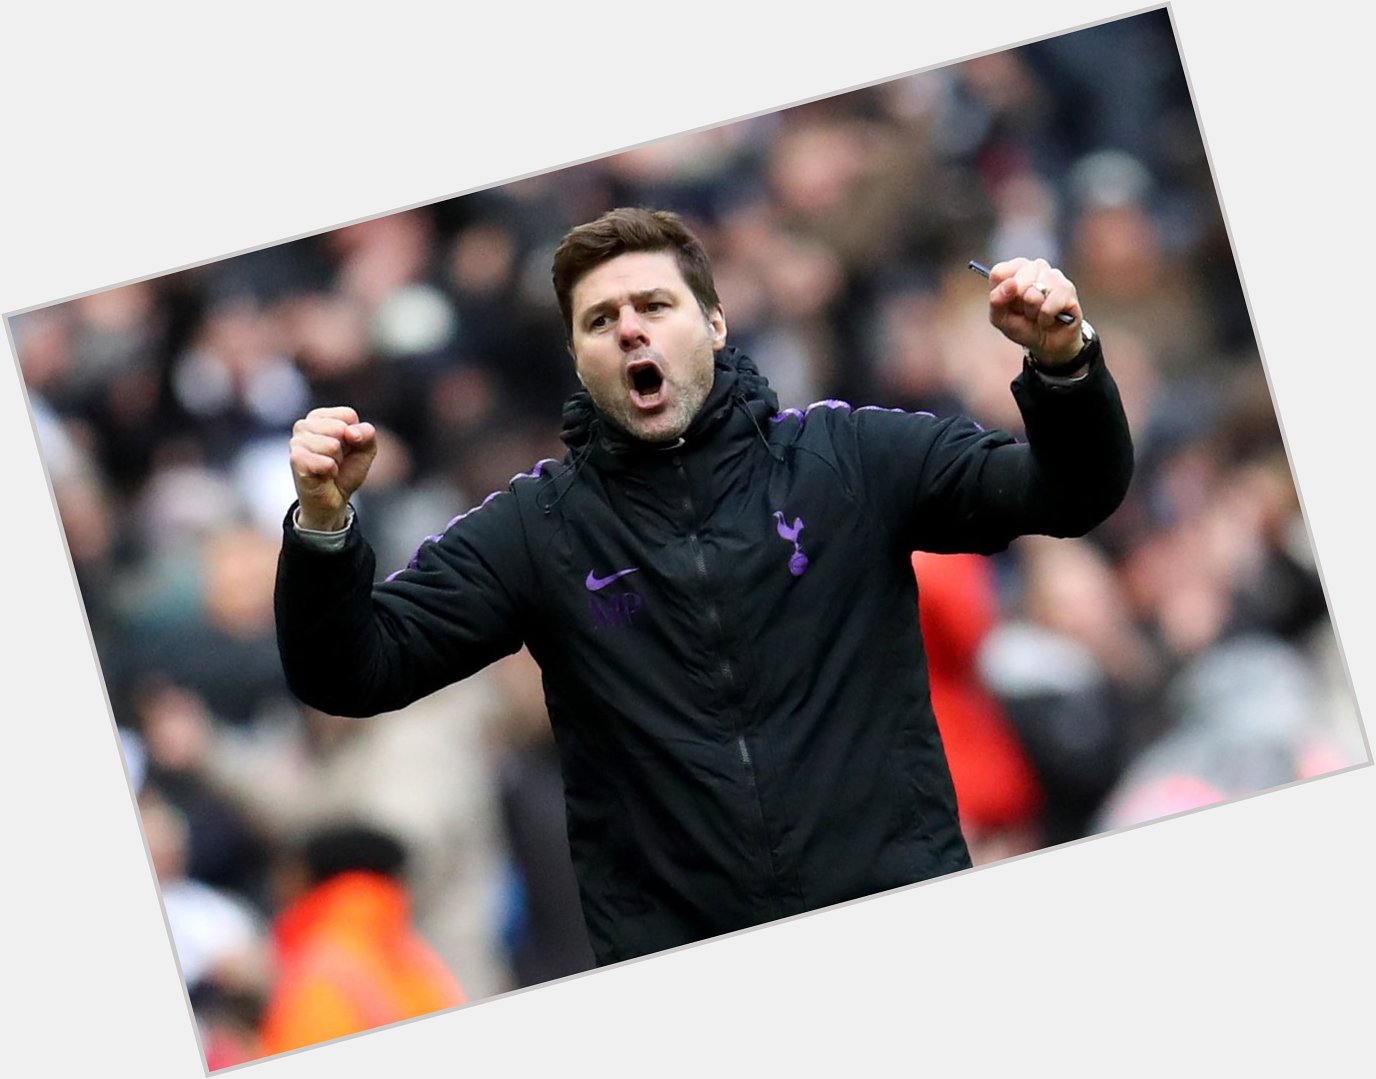 Happy birthday Mauricio Pochettino A North London Derby win today would make for the perfect present  